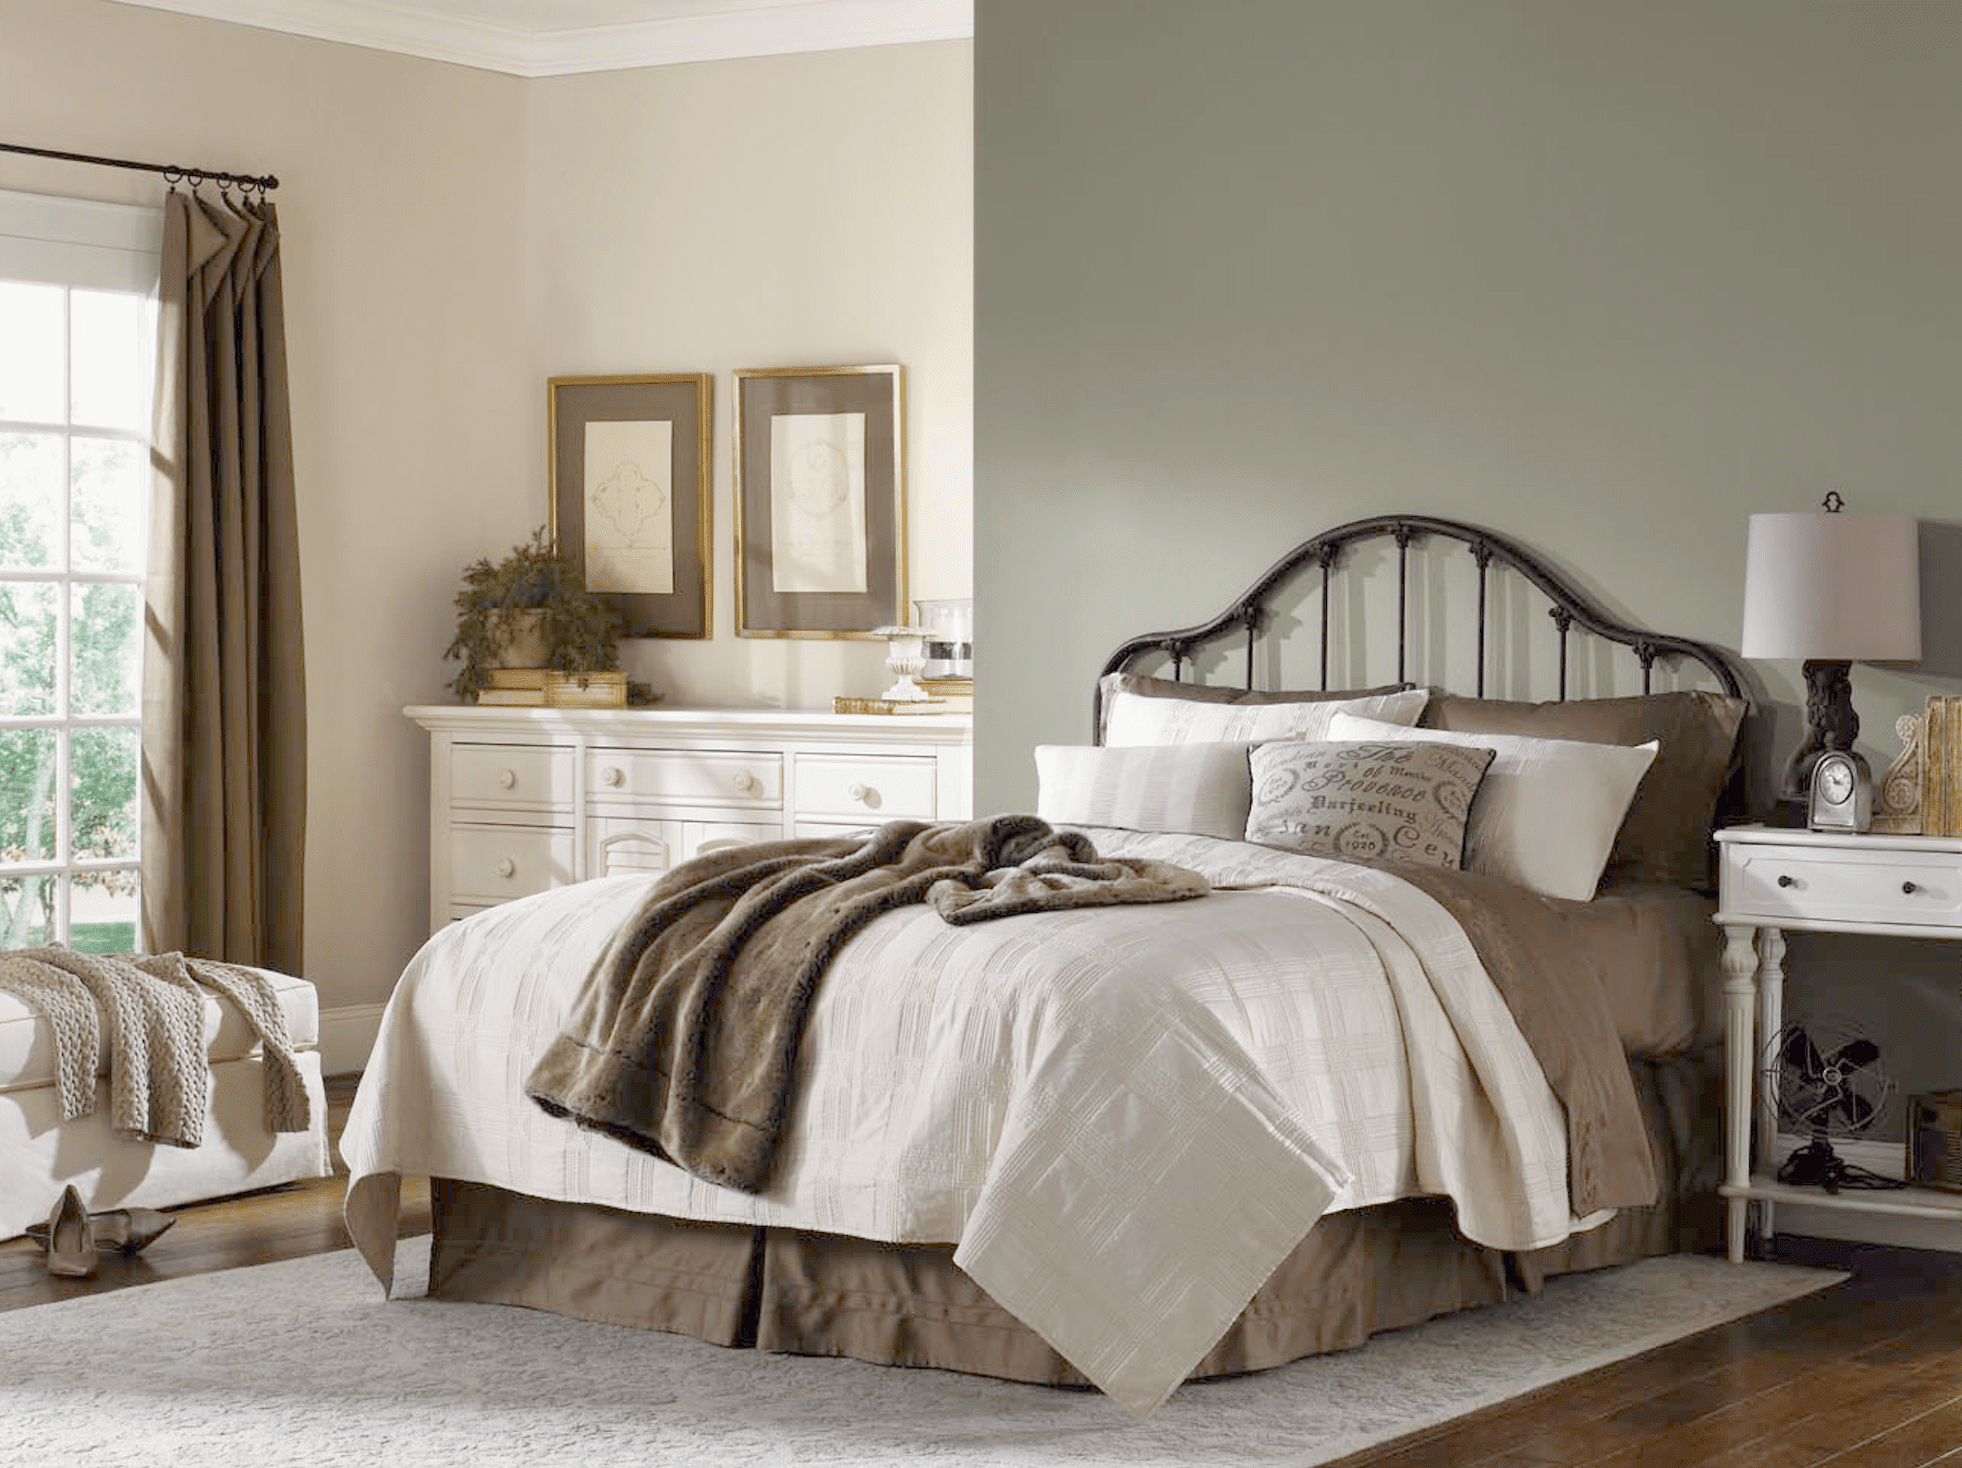 8 Relaxing Sherwin Williams Paint Colors For Bedrooms regarding dimensions 1962 X 1468